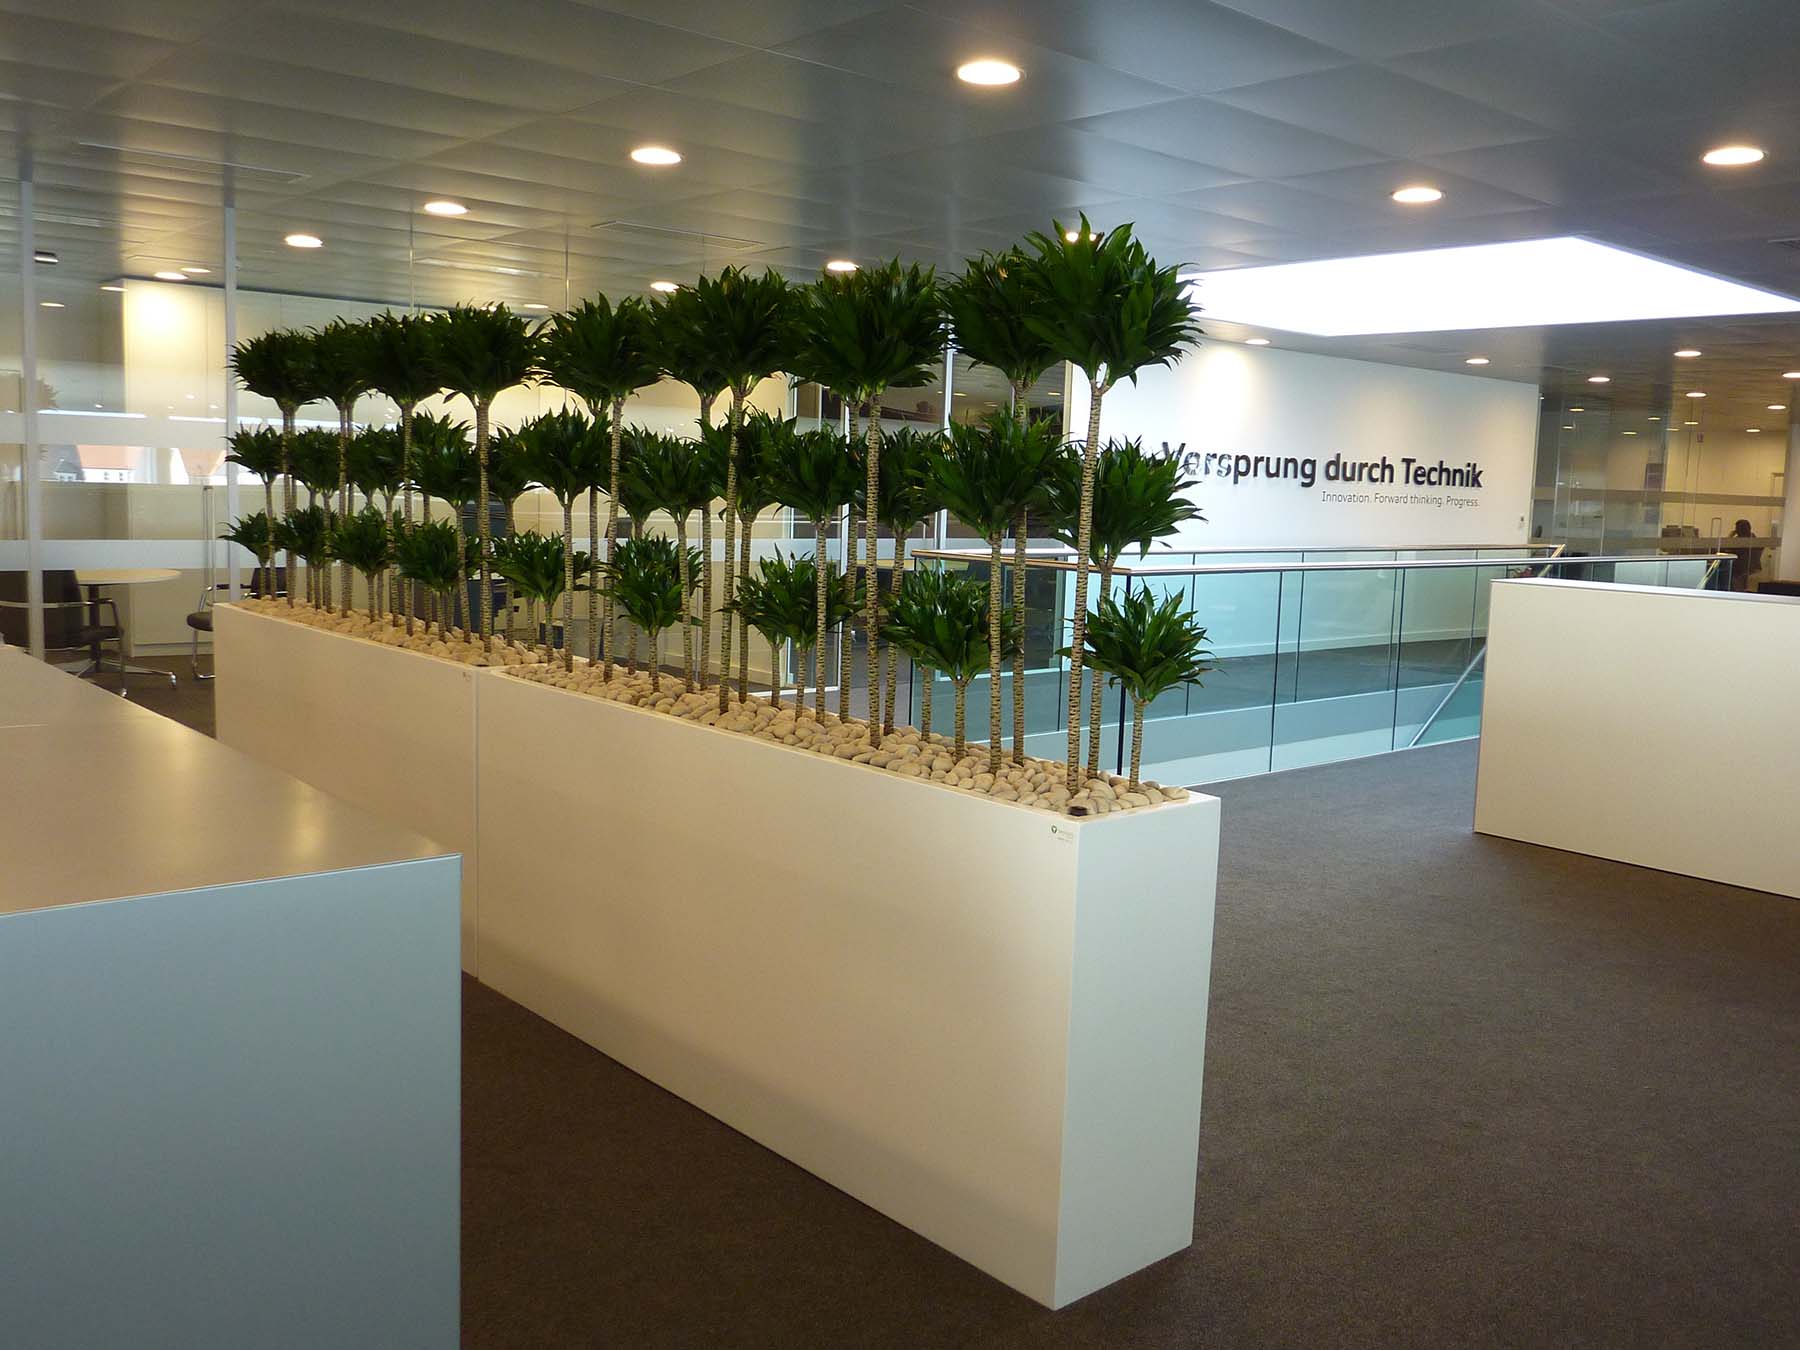 Planted screens with uniform Dracaena Compacta plants in white containers create biophilic divisions in Audi car showroom